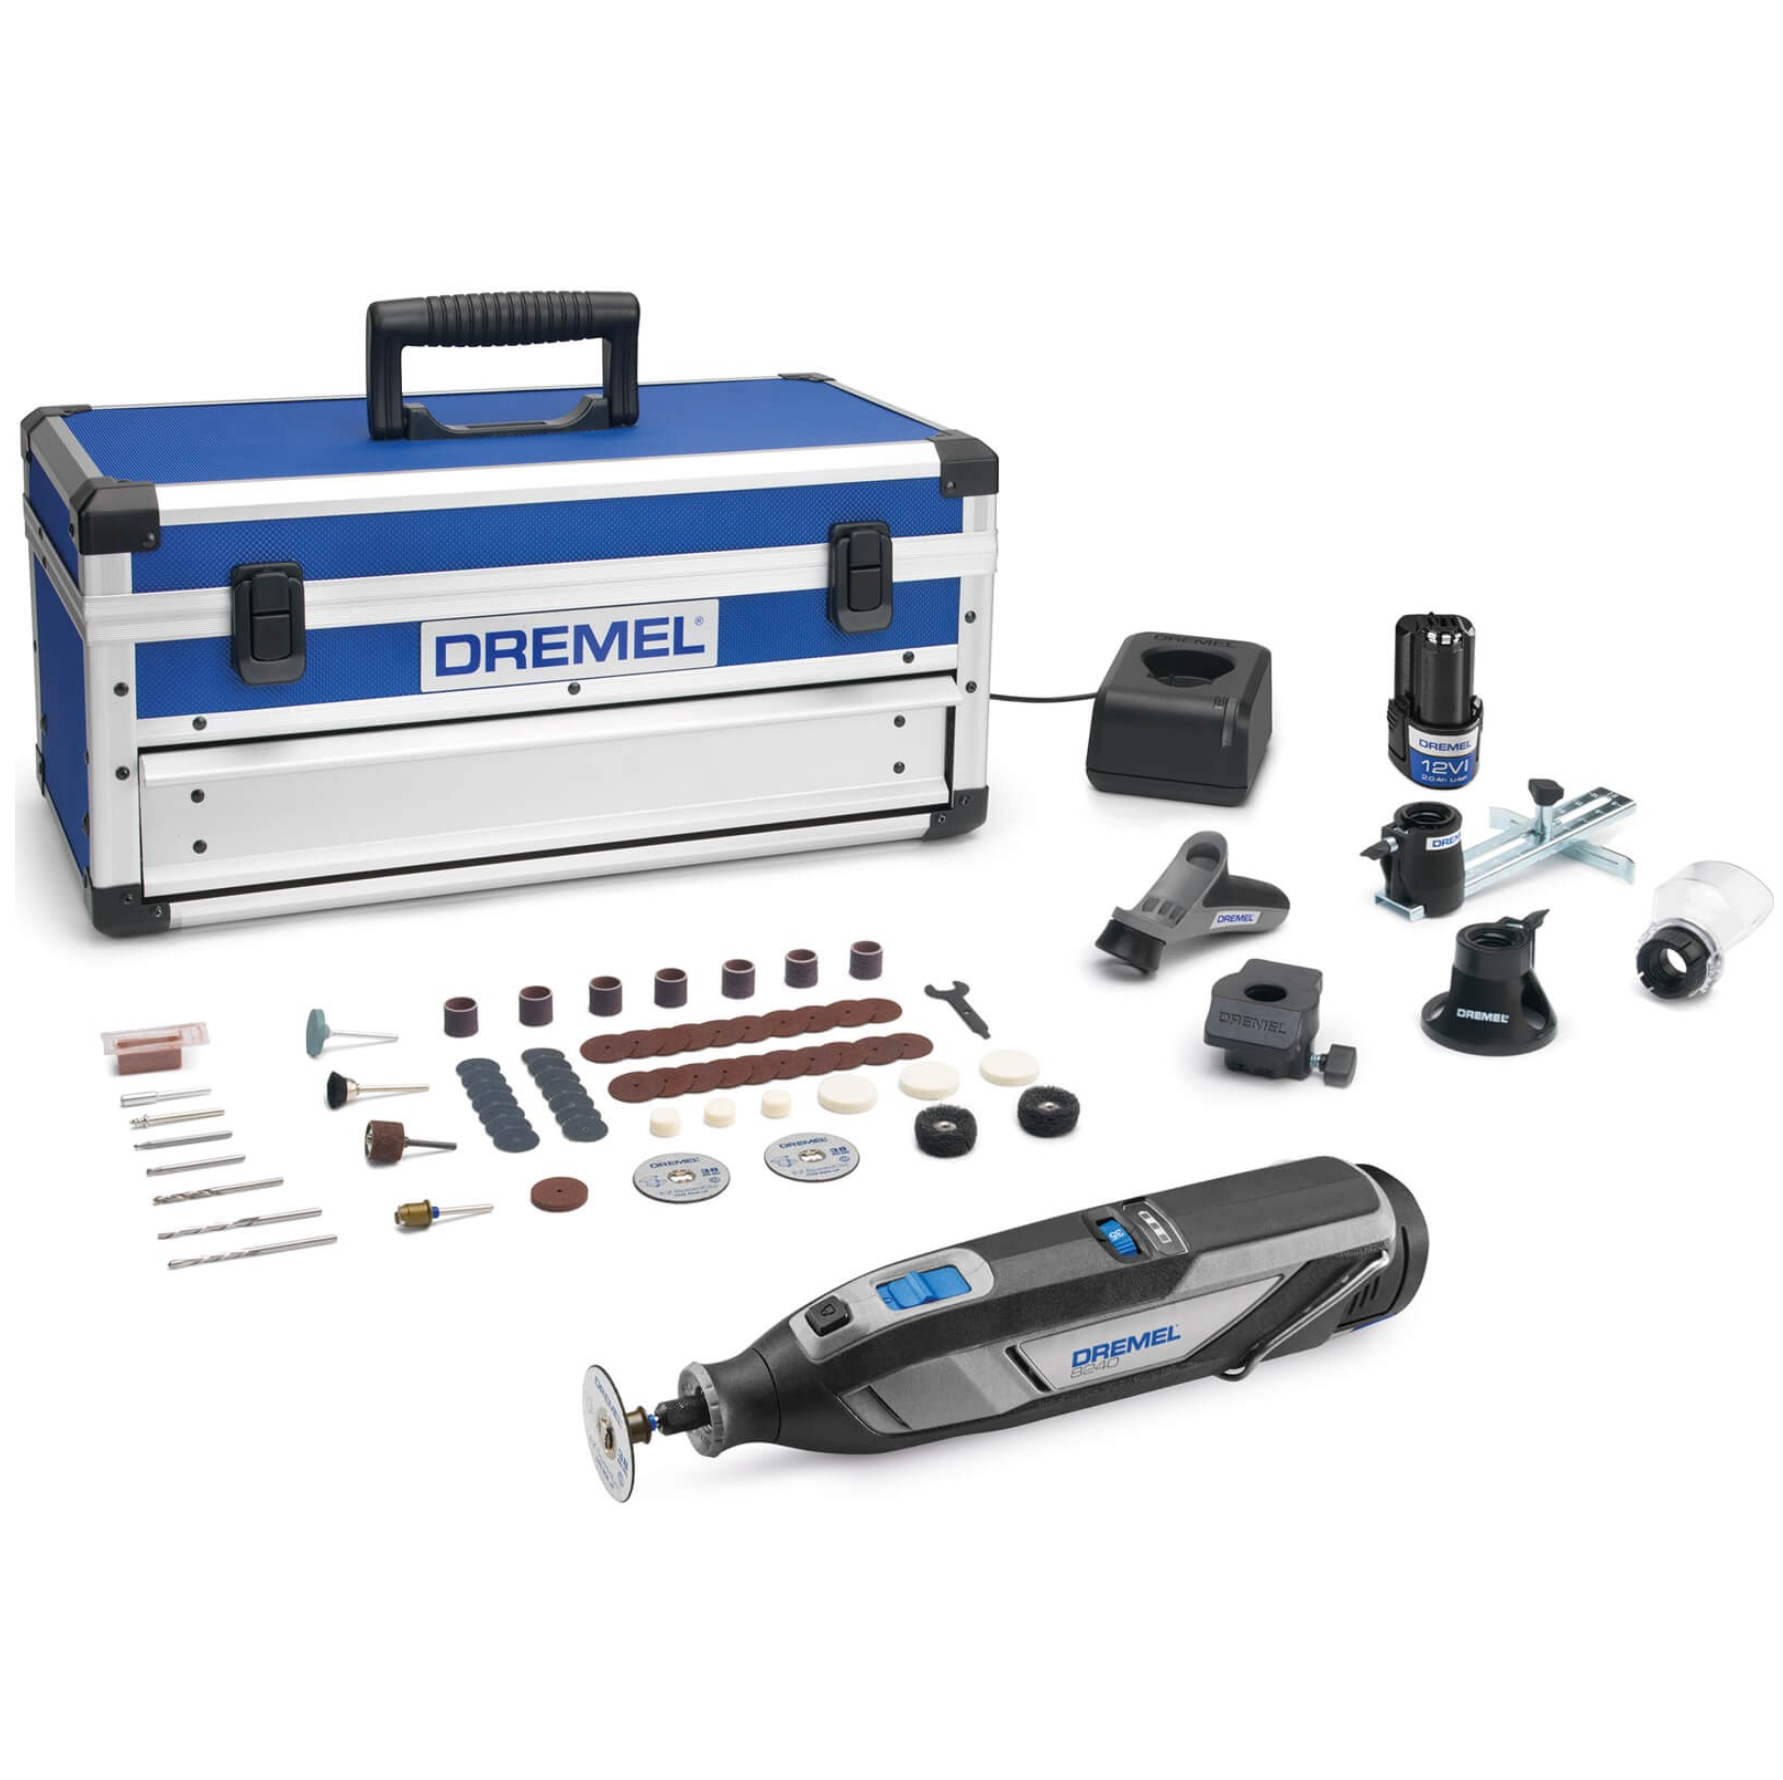 Dremel 8240-5/65 Cordless 12V ROTARY TOOL KIT With 5 ATTACHMENTS 65 ACCESSORIES & DELUXE ALUMINIUM CASE